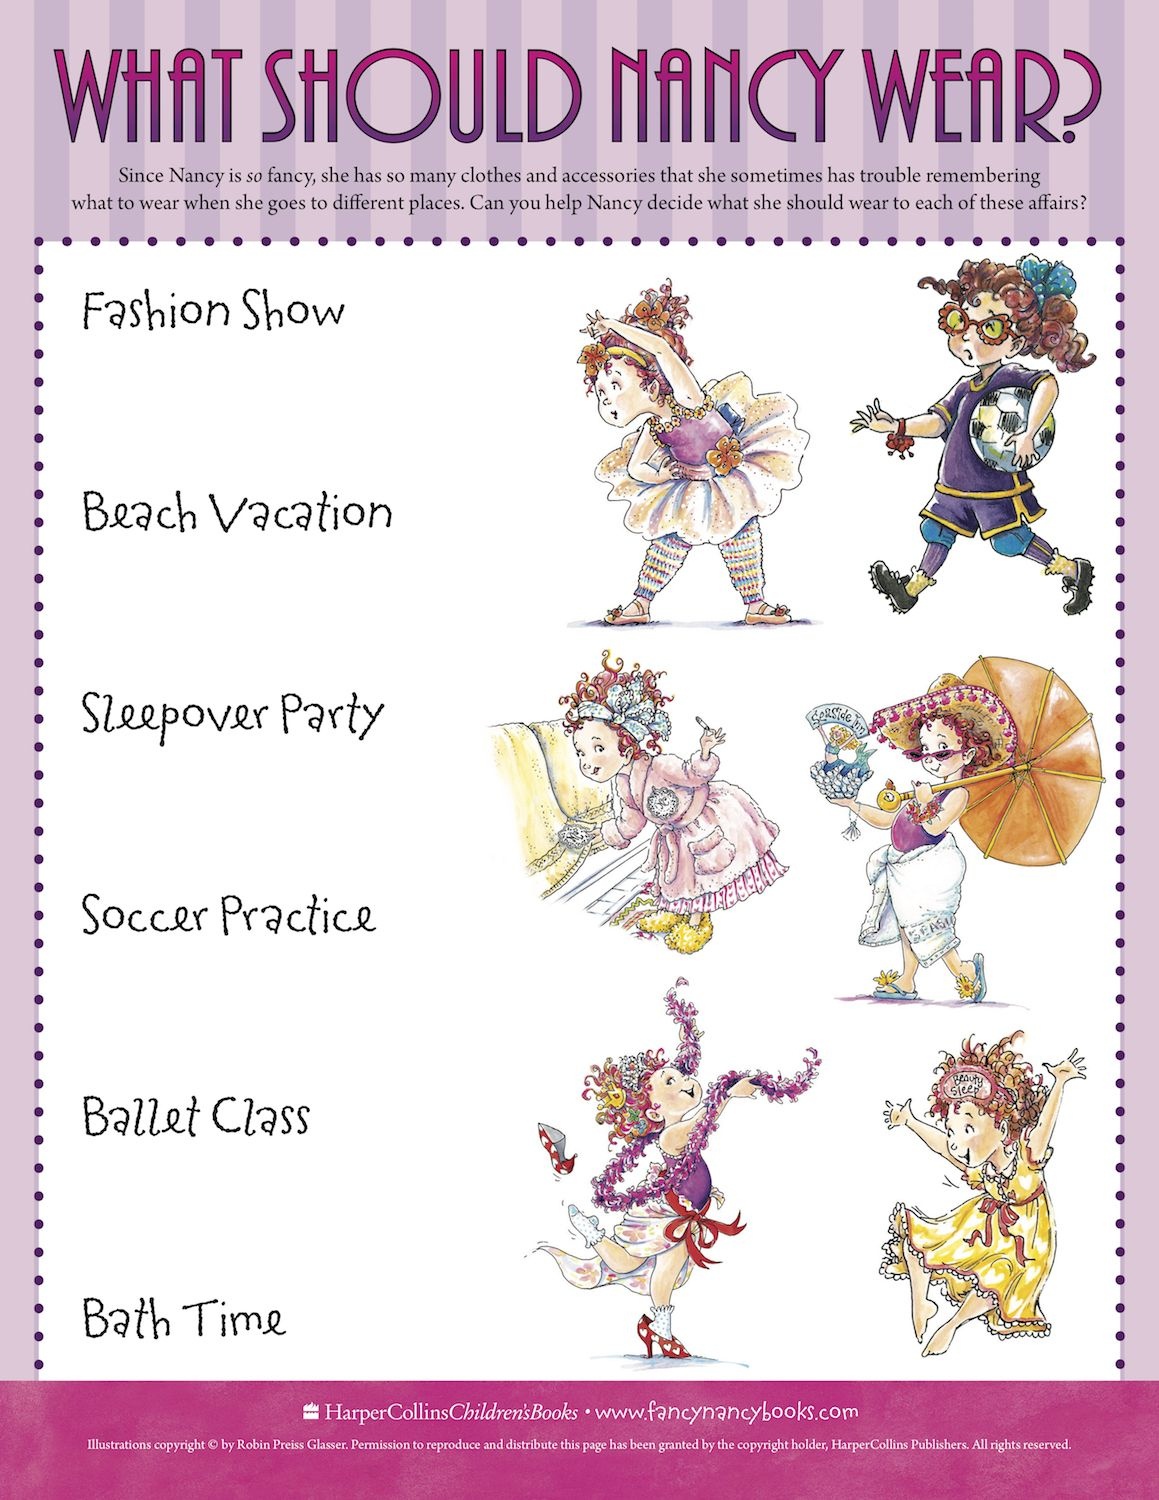 Match Fancy Nancy&amp;#039;s Outfit To The Event With This Fun Free Printable - Free Printable Tea Party Games